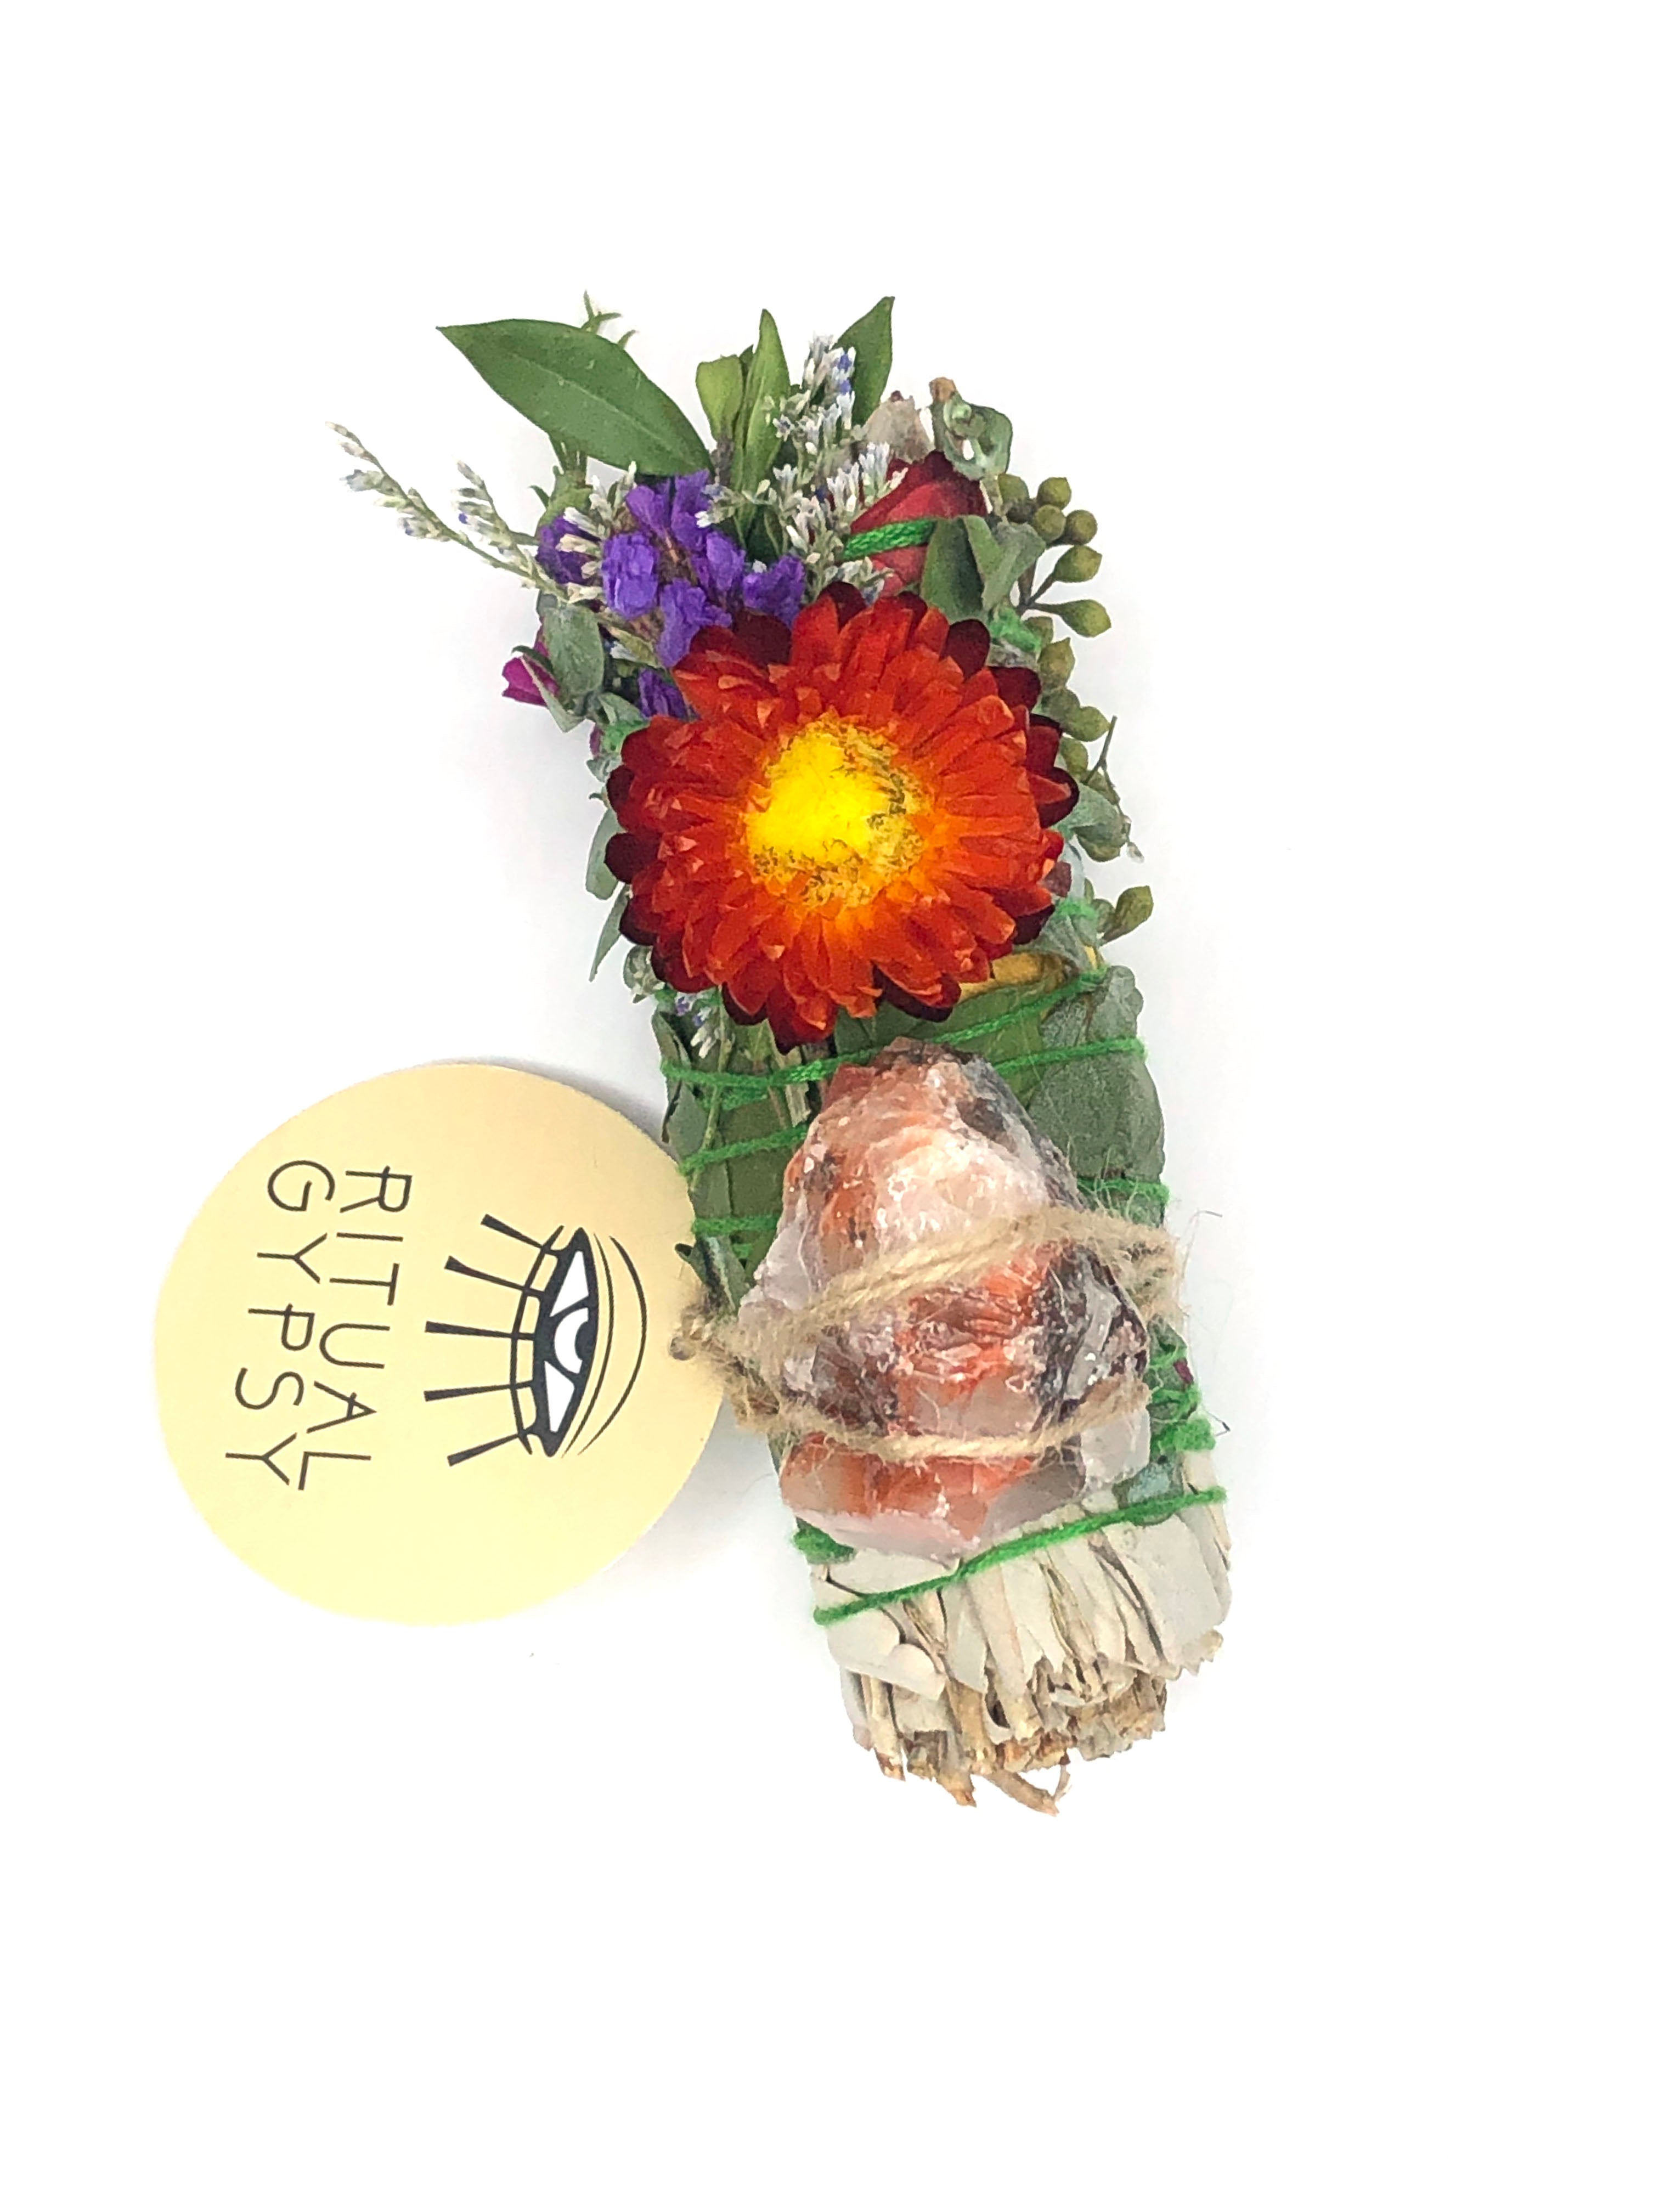 white sage smoke cleansing smudge bundle wrapped in florals with red strawflower and orange rainbow calcite crystal and round ritual gypsy product tag attached on white background